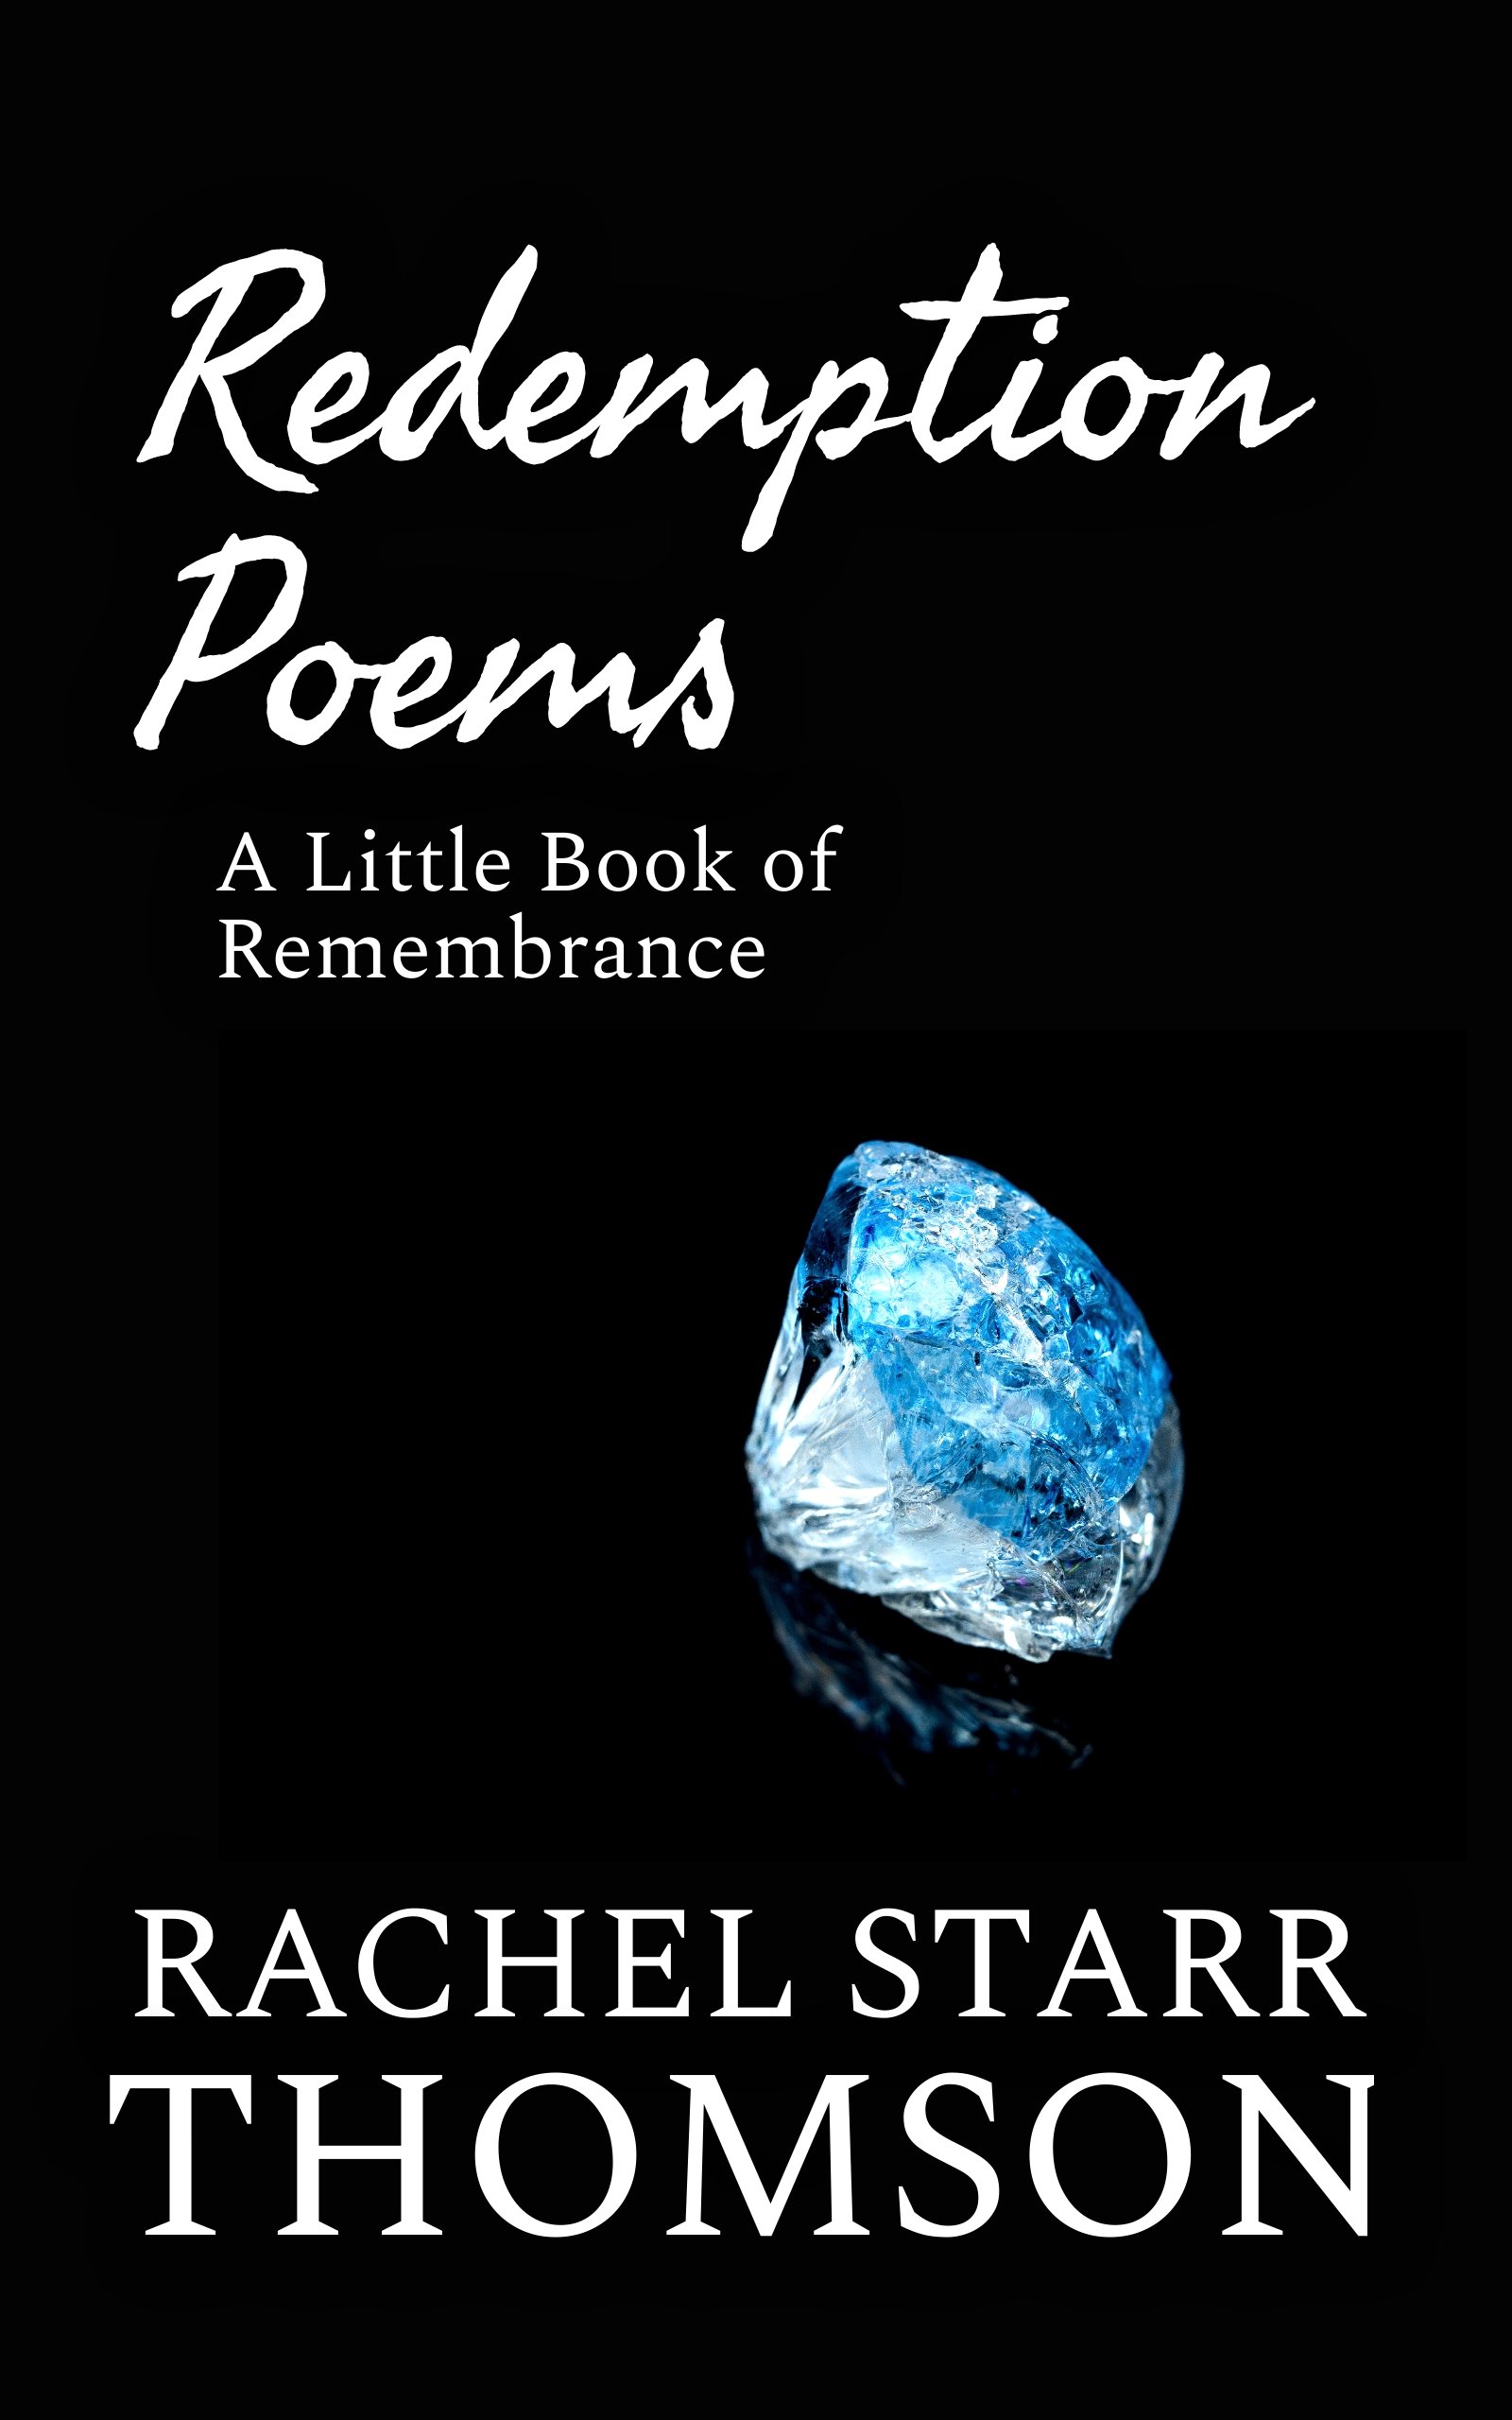 New Private Release: Redemption Poems